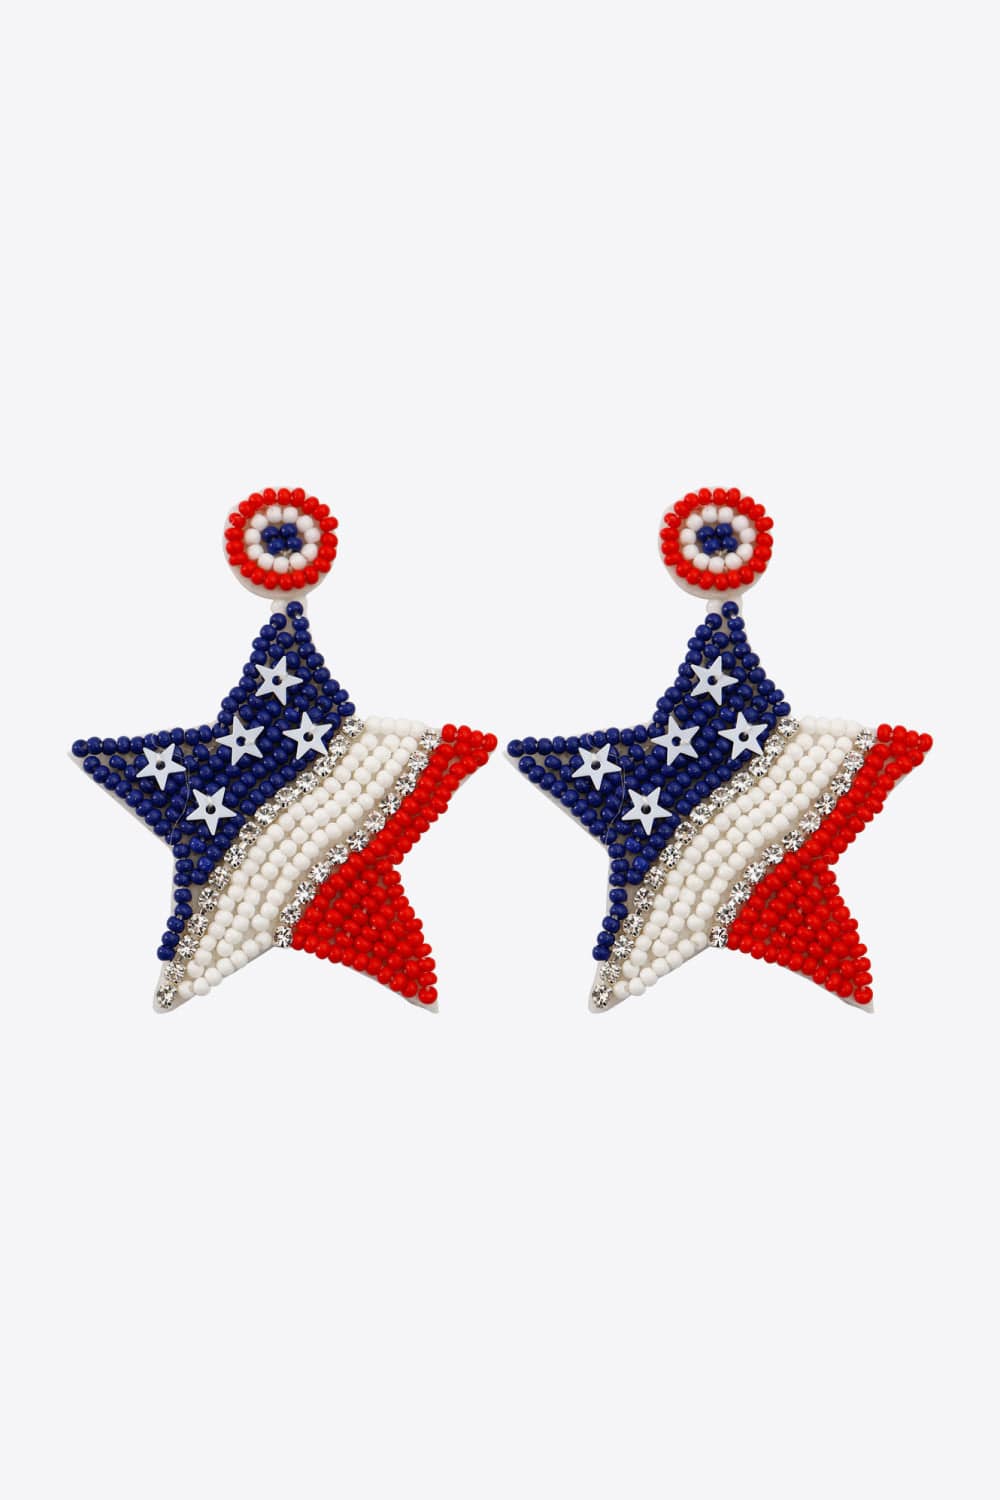 The802Gypsy Accessories Multicolor / One Size GYPSY-US Flag Beaded Star Earrings